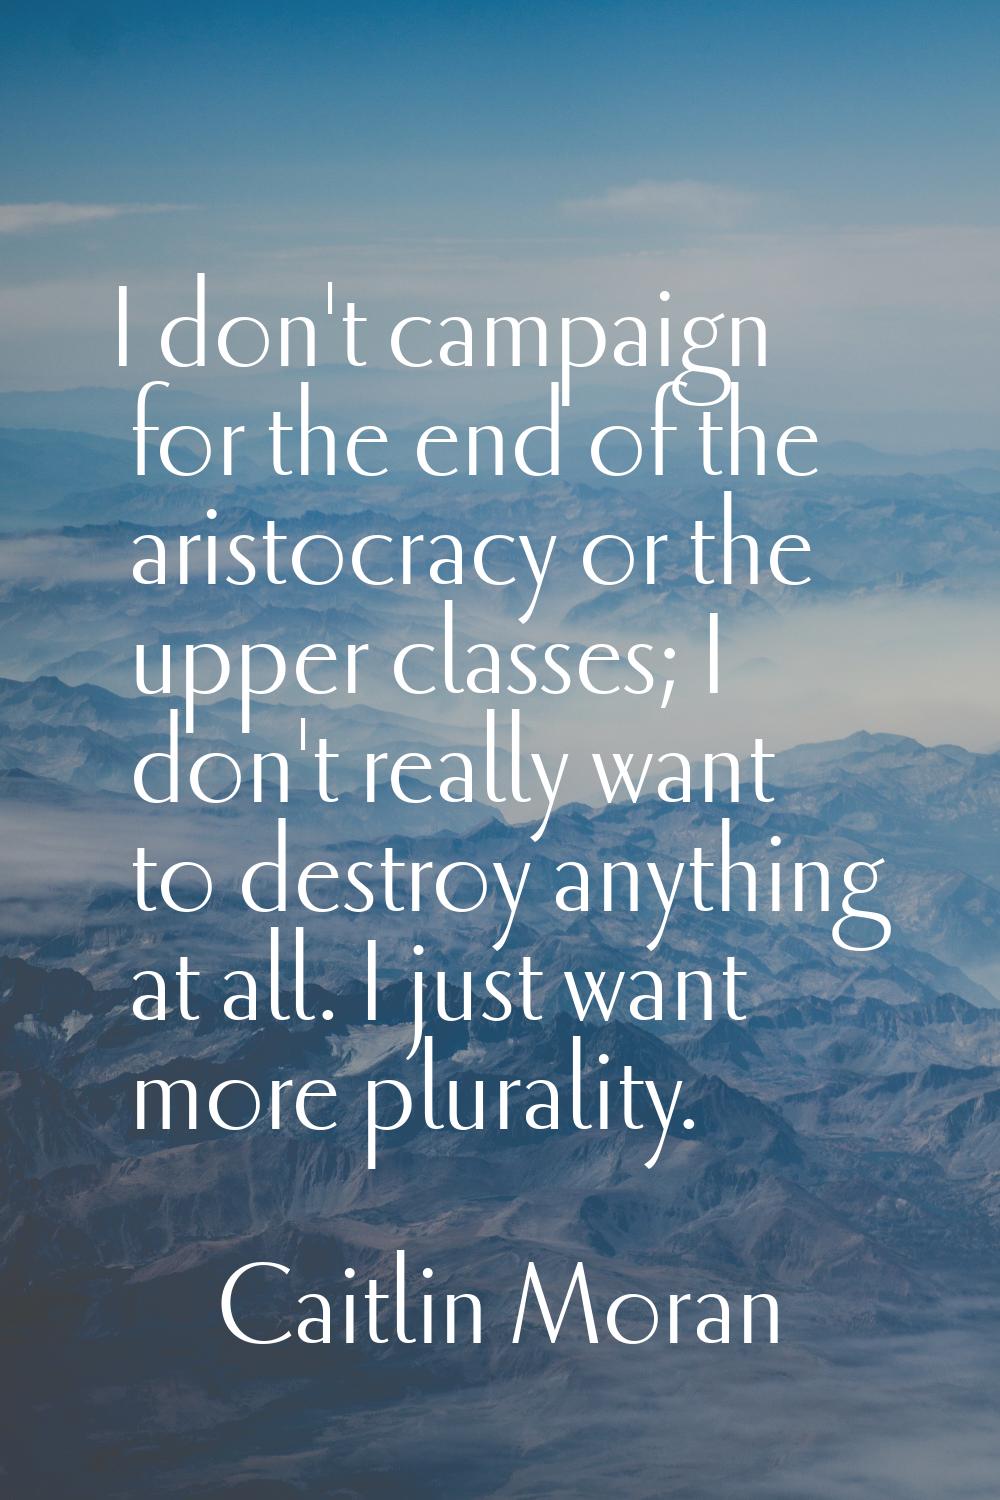 I don't campaign for the end of the aristocracy or the upper classes; I don't really want to destro